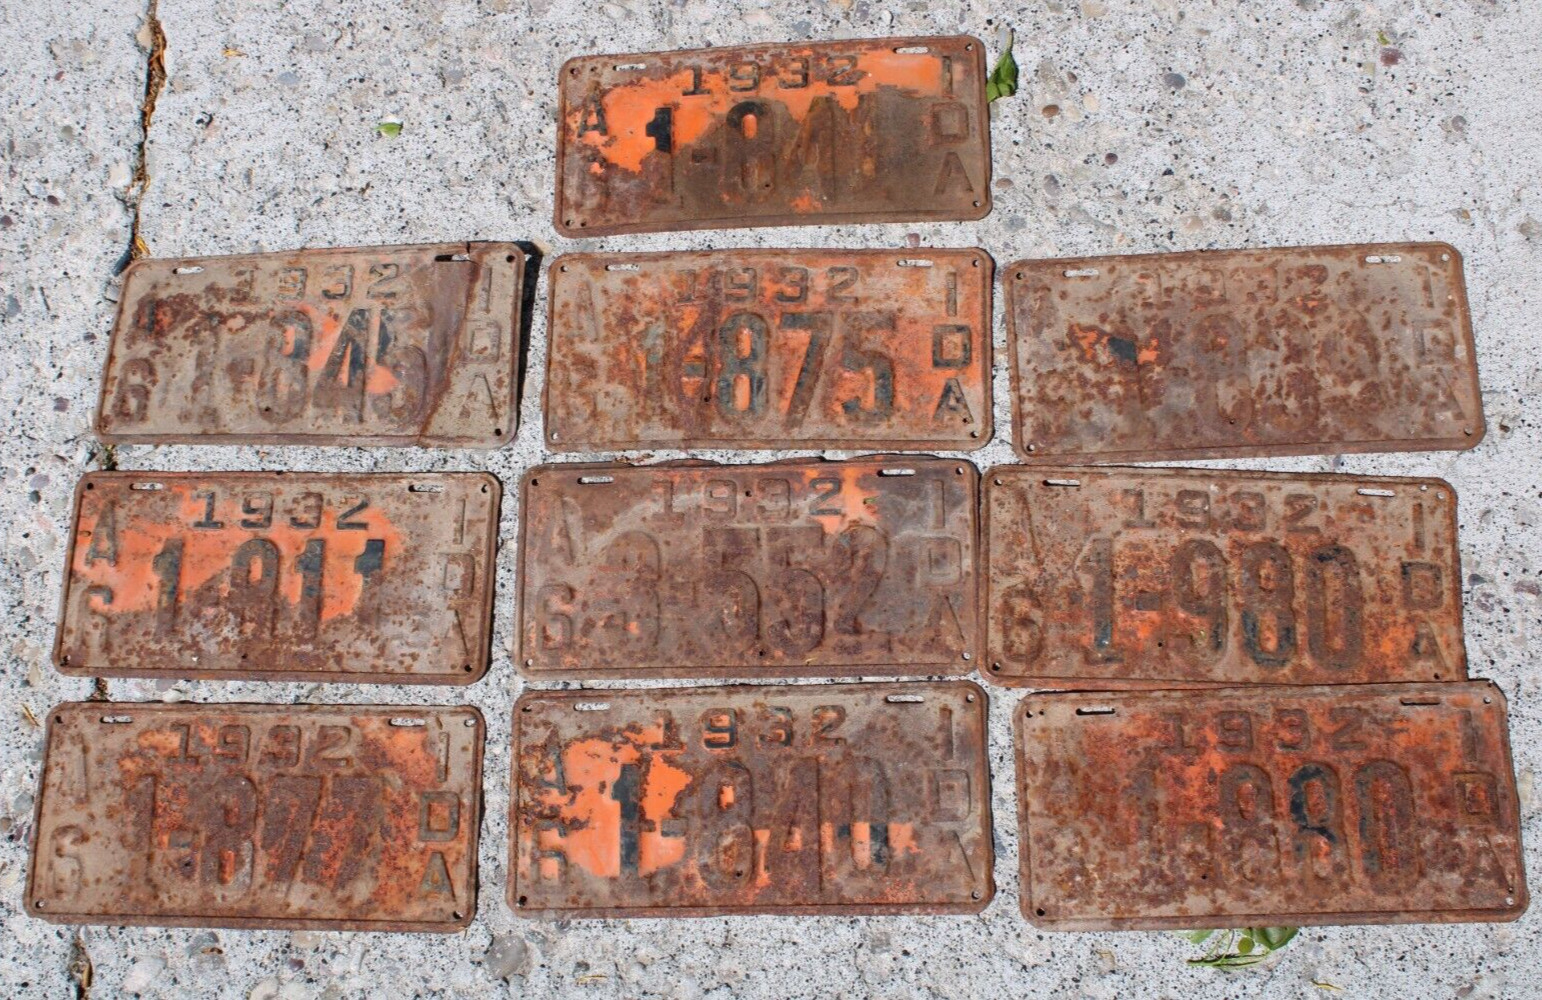 Lot of 10 Old Antique Vintage Idaho License Plates - 1932